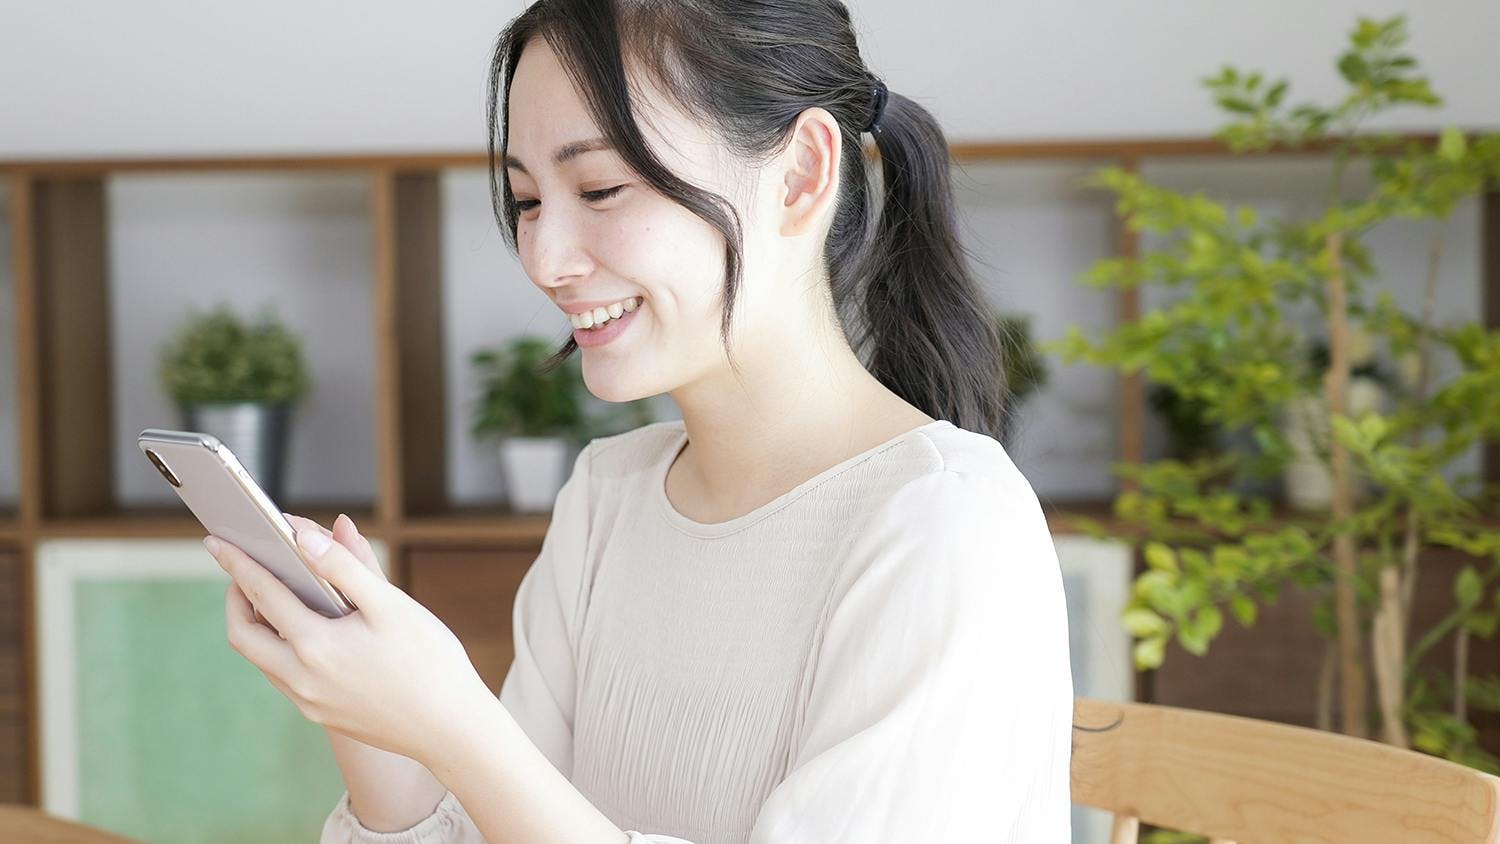 Image of a smiling woman holding a smartphone in her hand.